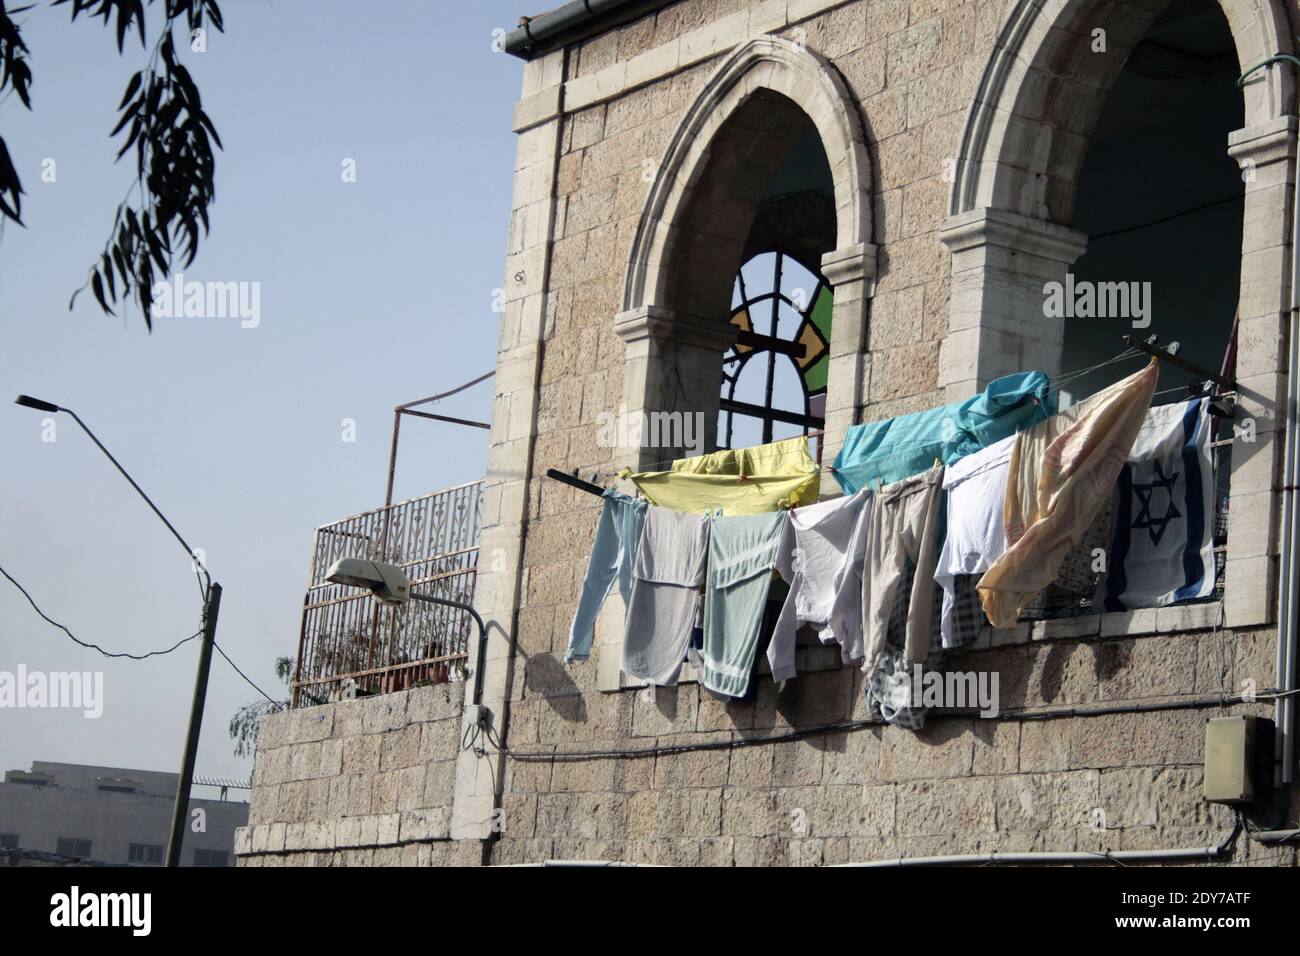 Laundry that dries with an israeli flag at balcony of an old house in West Jerusalem. Israel Stock Photo